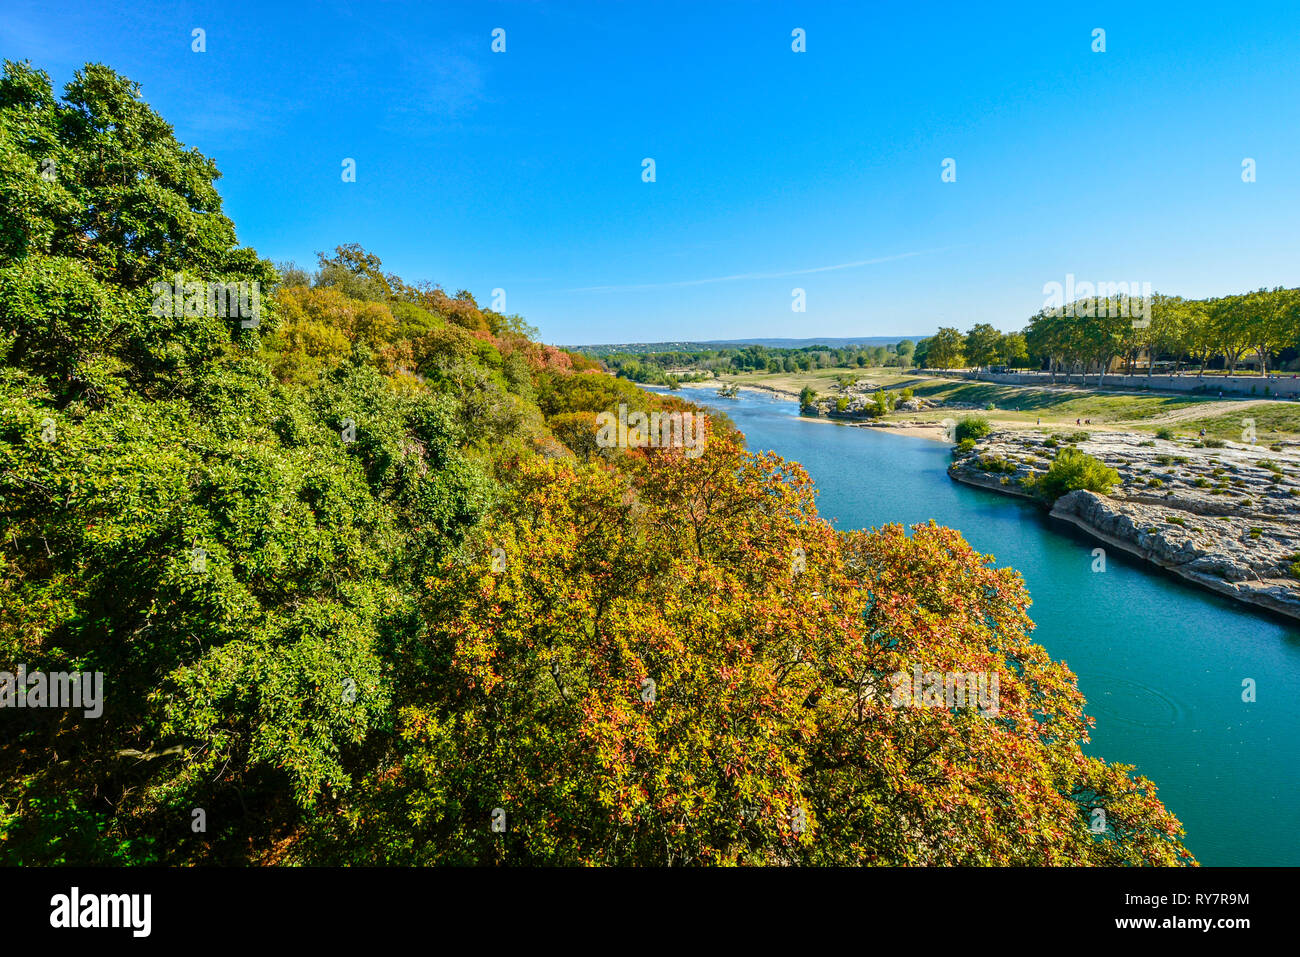 The river Gardon in the Provence region of Southern France on a beautiful sunny day in late summer, early fall Stock Photo